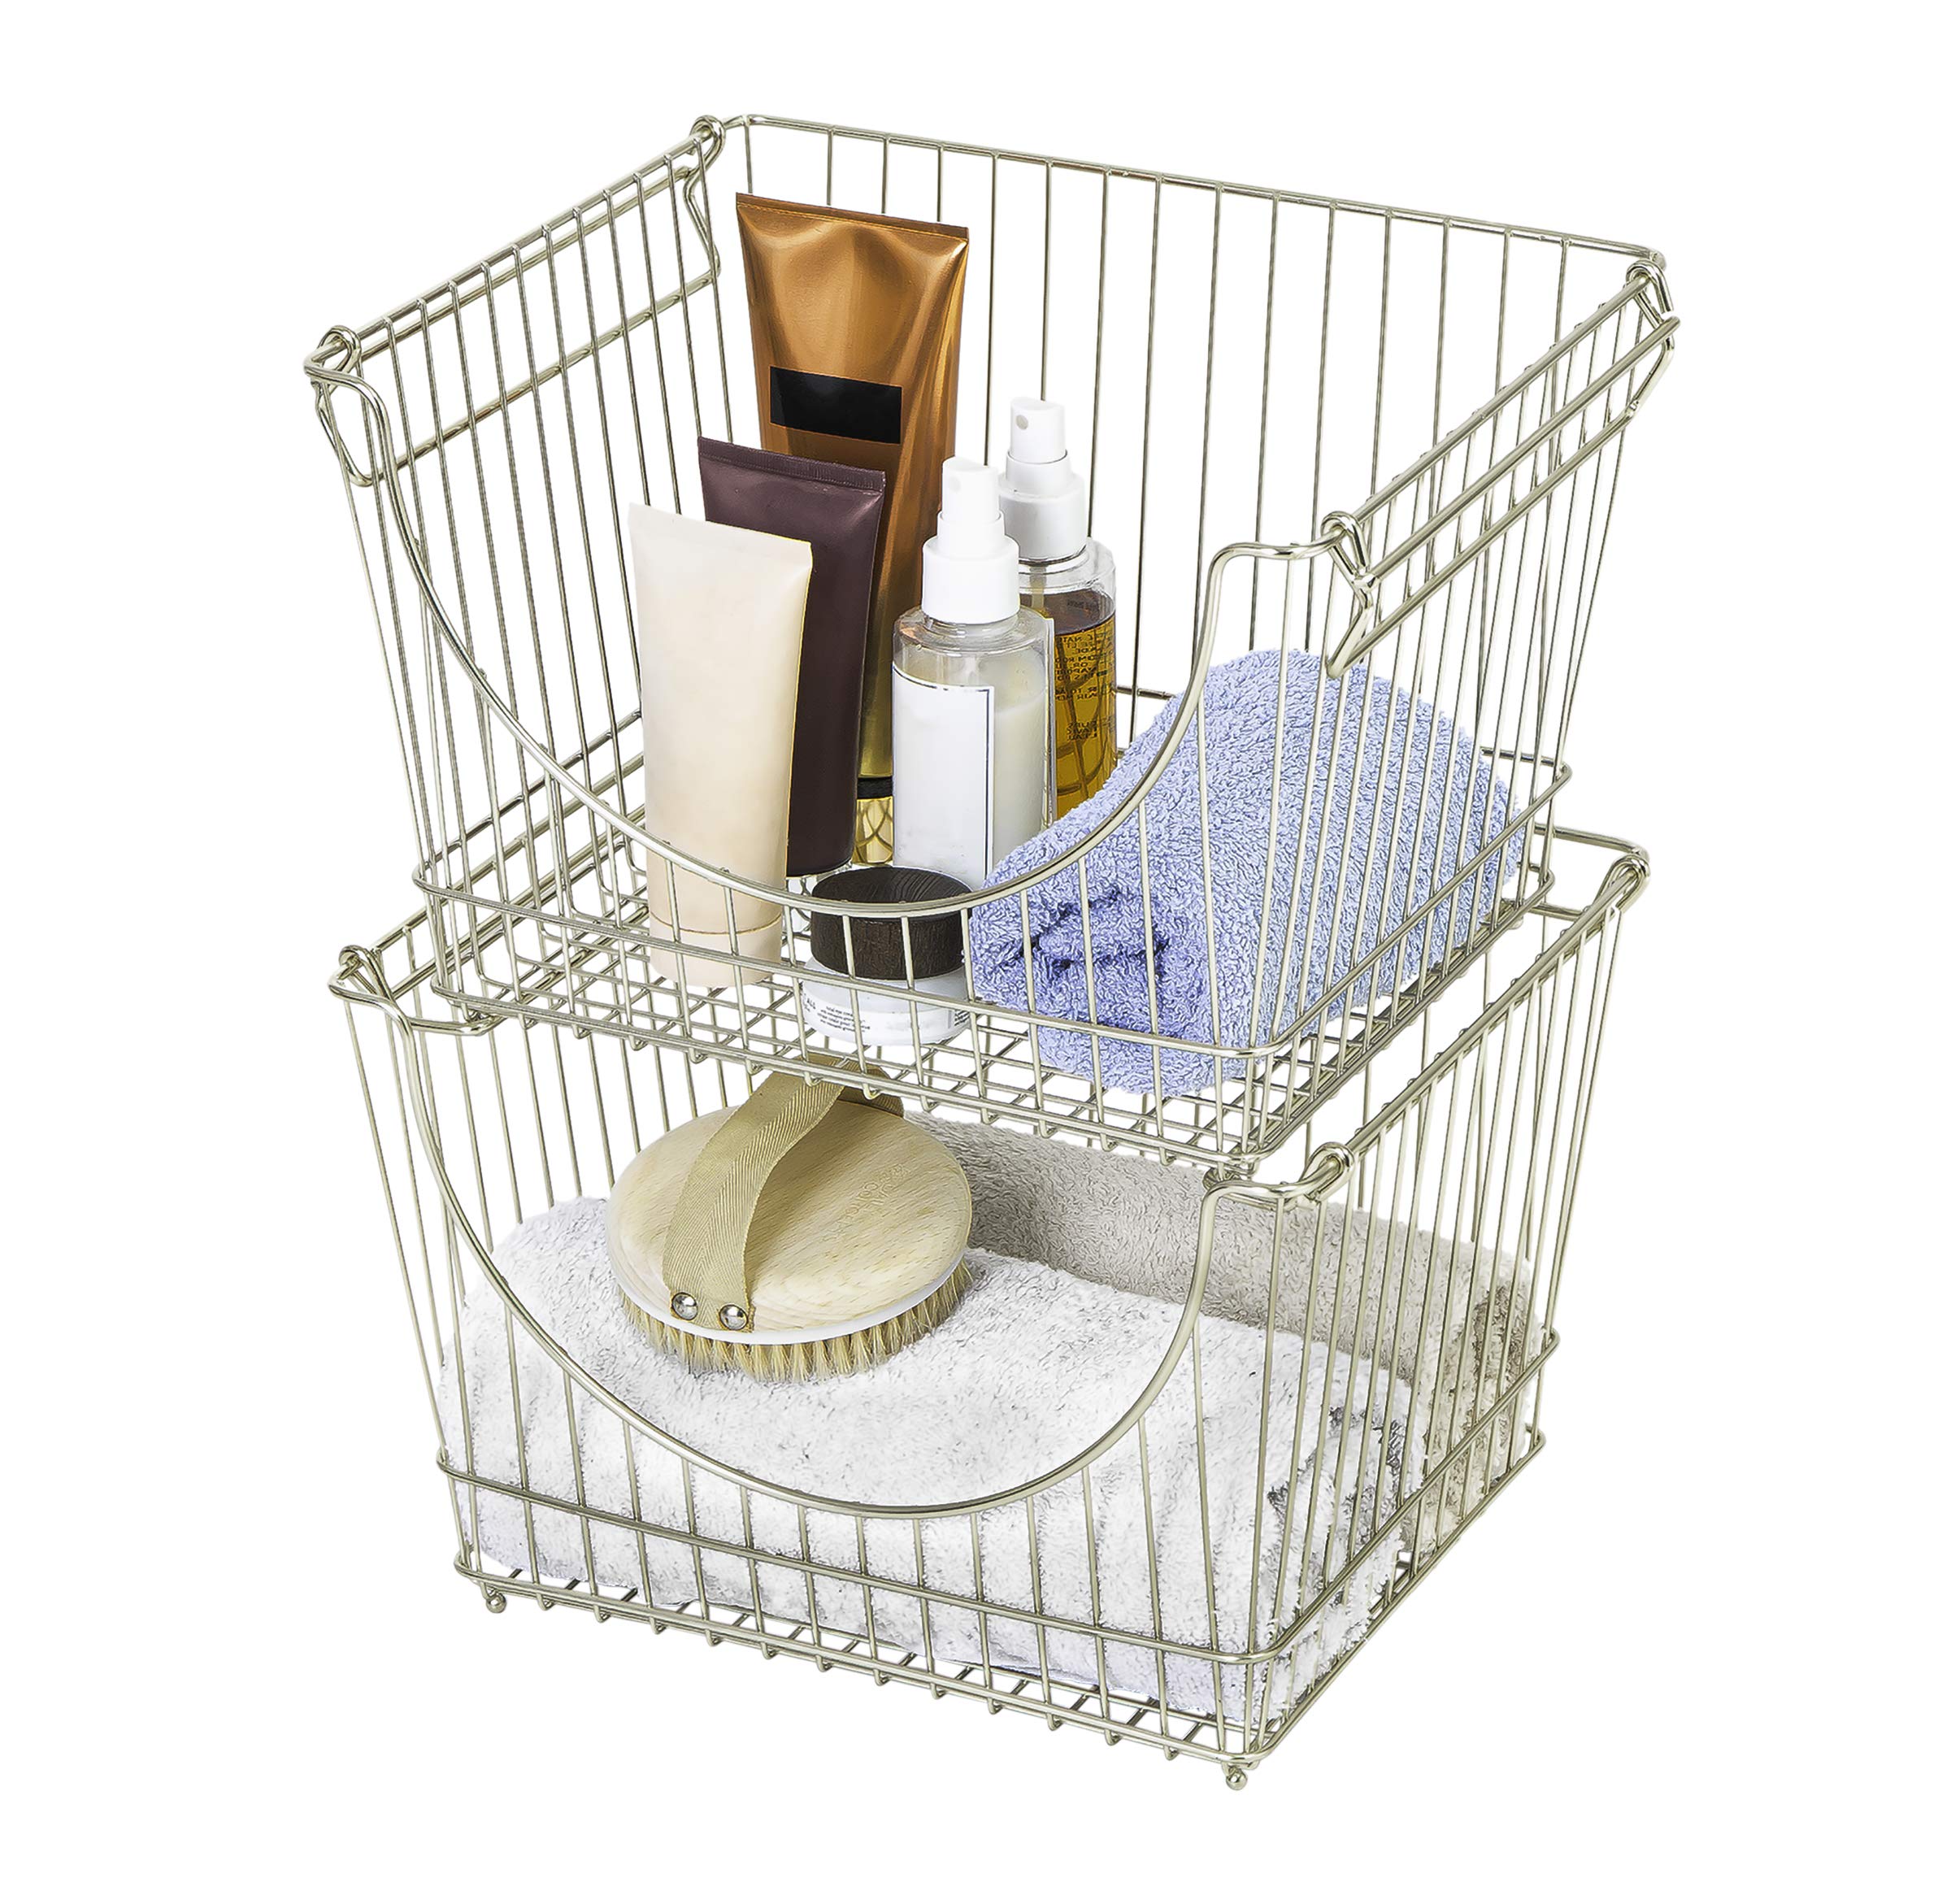 Large Metal Wire Stacking Baskets with Handles - Smart Design® 26